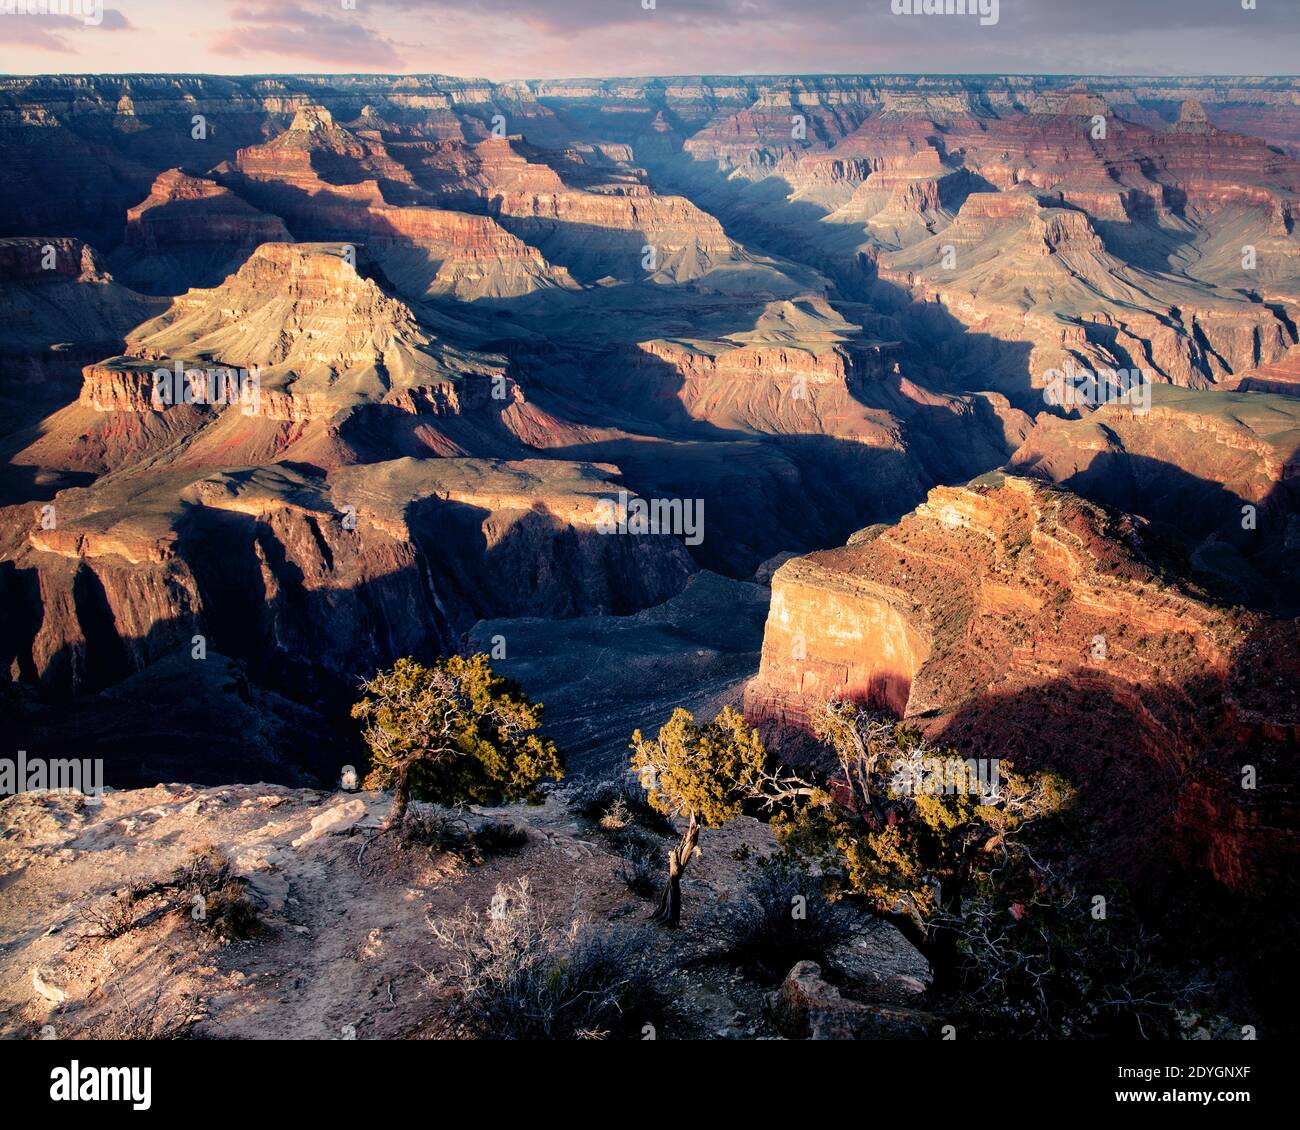 The Grand Canyon extends to the horizon as seen from Powell Point. Stock Photo